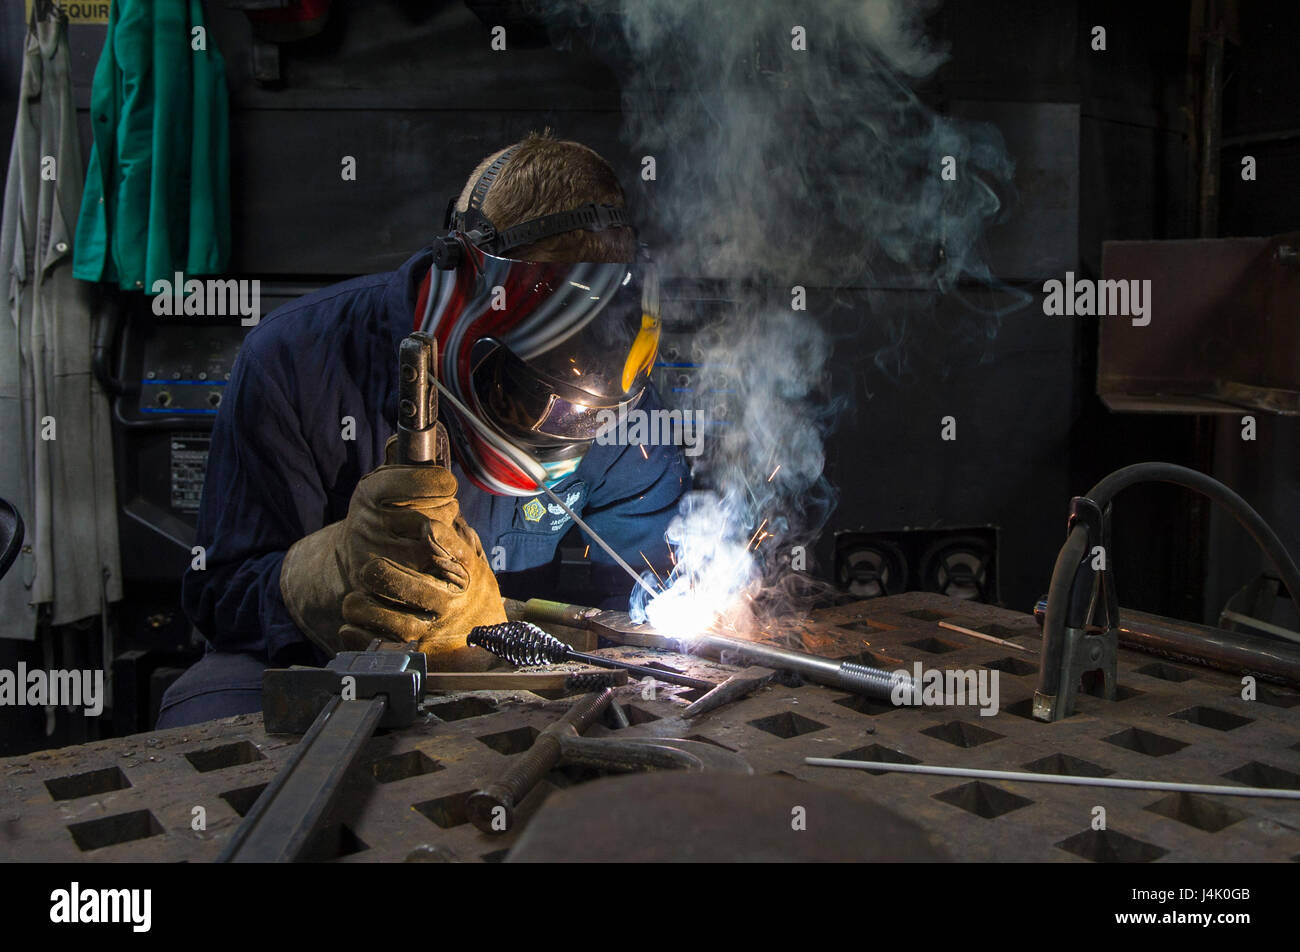 161001-N-WS581-053  ARABIAN GULF (Oct. 01, 2016) Petty Officer 3rd Class Jacob Keller, from Marshall, Ill., welds together an arm for a ballistic door in the repair shop of the aircraft carrier USS Dwight D. Eisenhower (CVN 69) (Ike). Keller serves aboard Ike as a hull maintenance technician and is responsible for metal work on the ship. Ike and its Carrier Strike Group are deployed in support of Operation Inherent Resolve, maritime security operations and theater security cooperation efforts in the U.S. 5th Fleet area of operations. (U.S. Navy photo by Petty Officer 3rd Class Andrew J. Sneeri Stock Photo